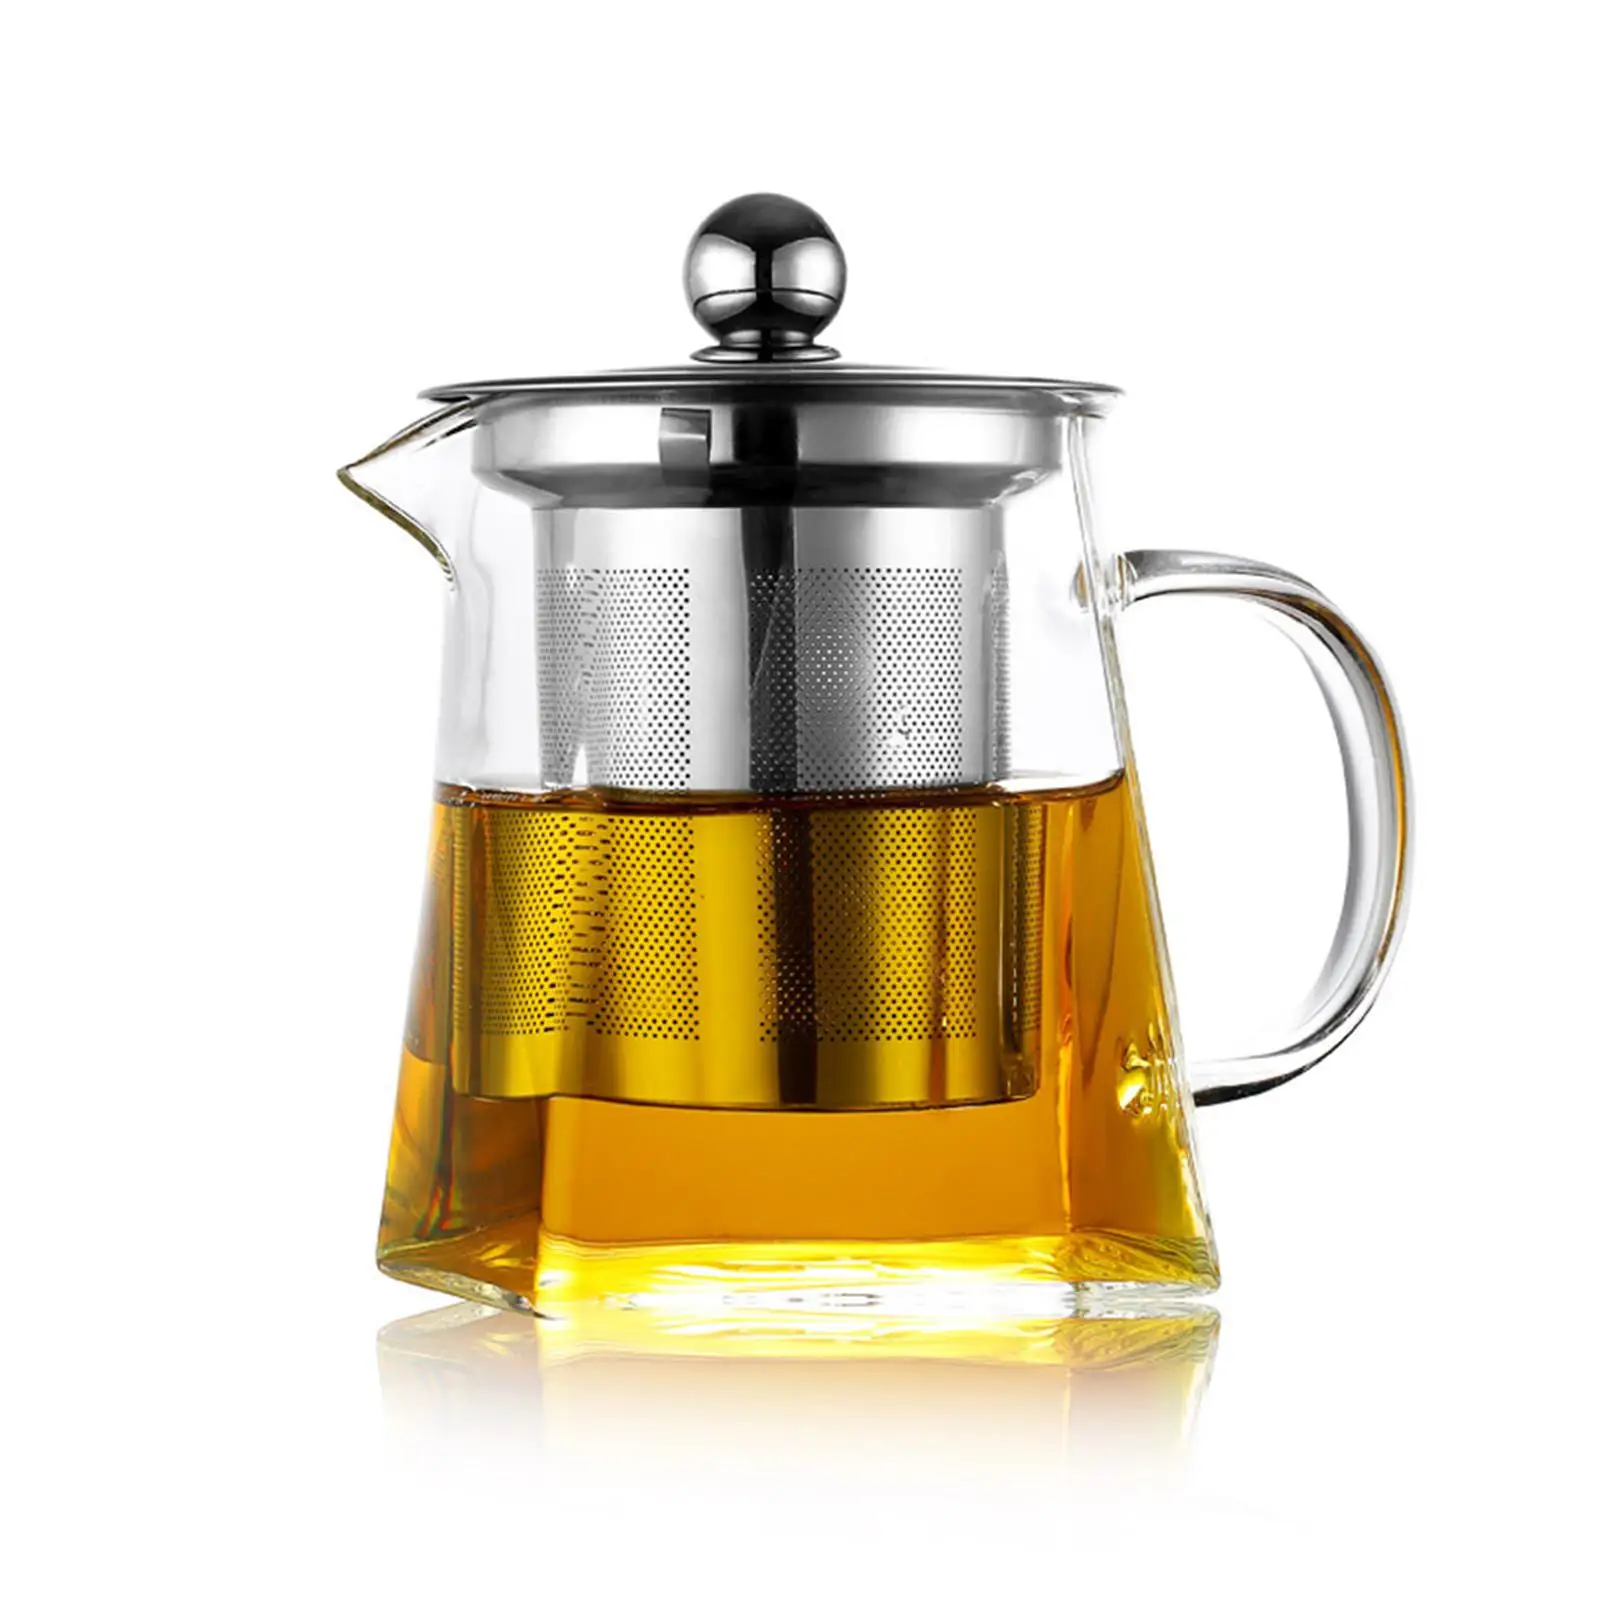 Heat Resistant Glass Teapot with Removable Filter for Restaurant Loose Tea